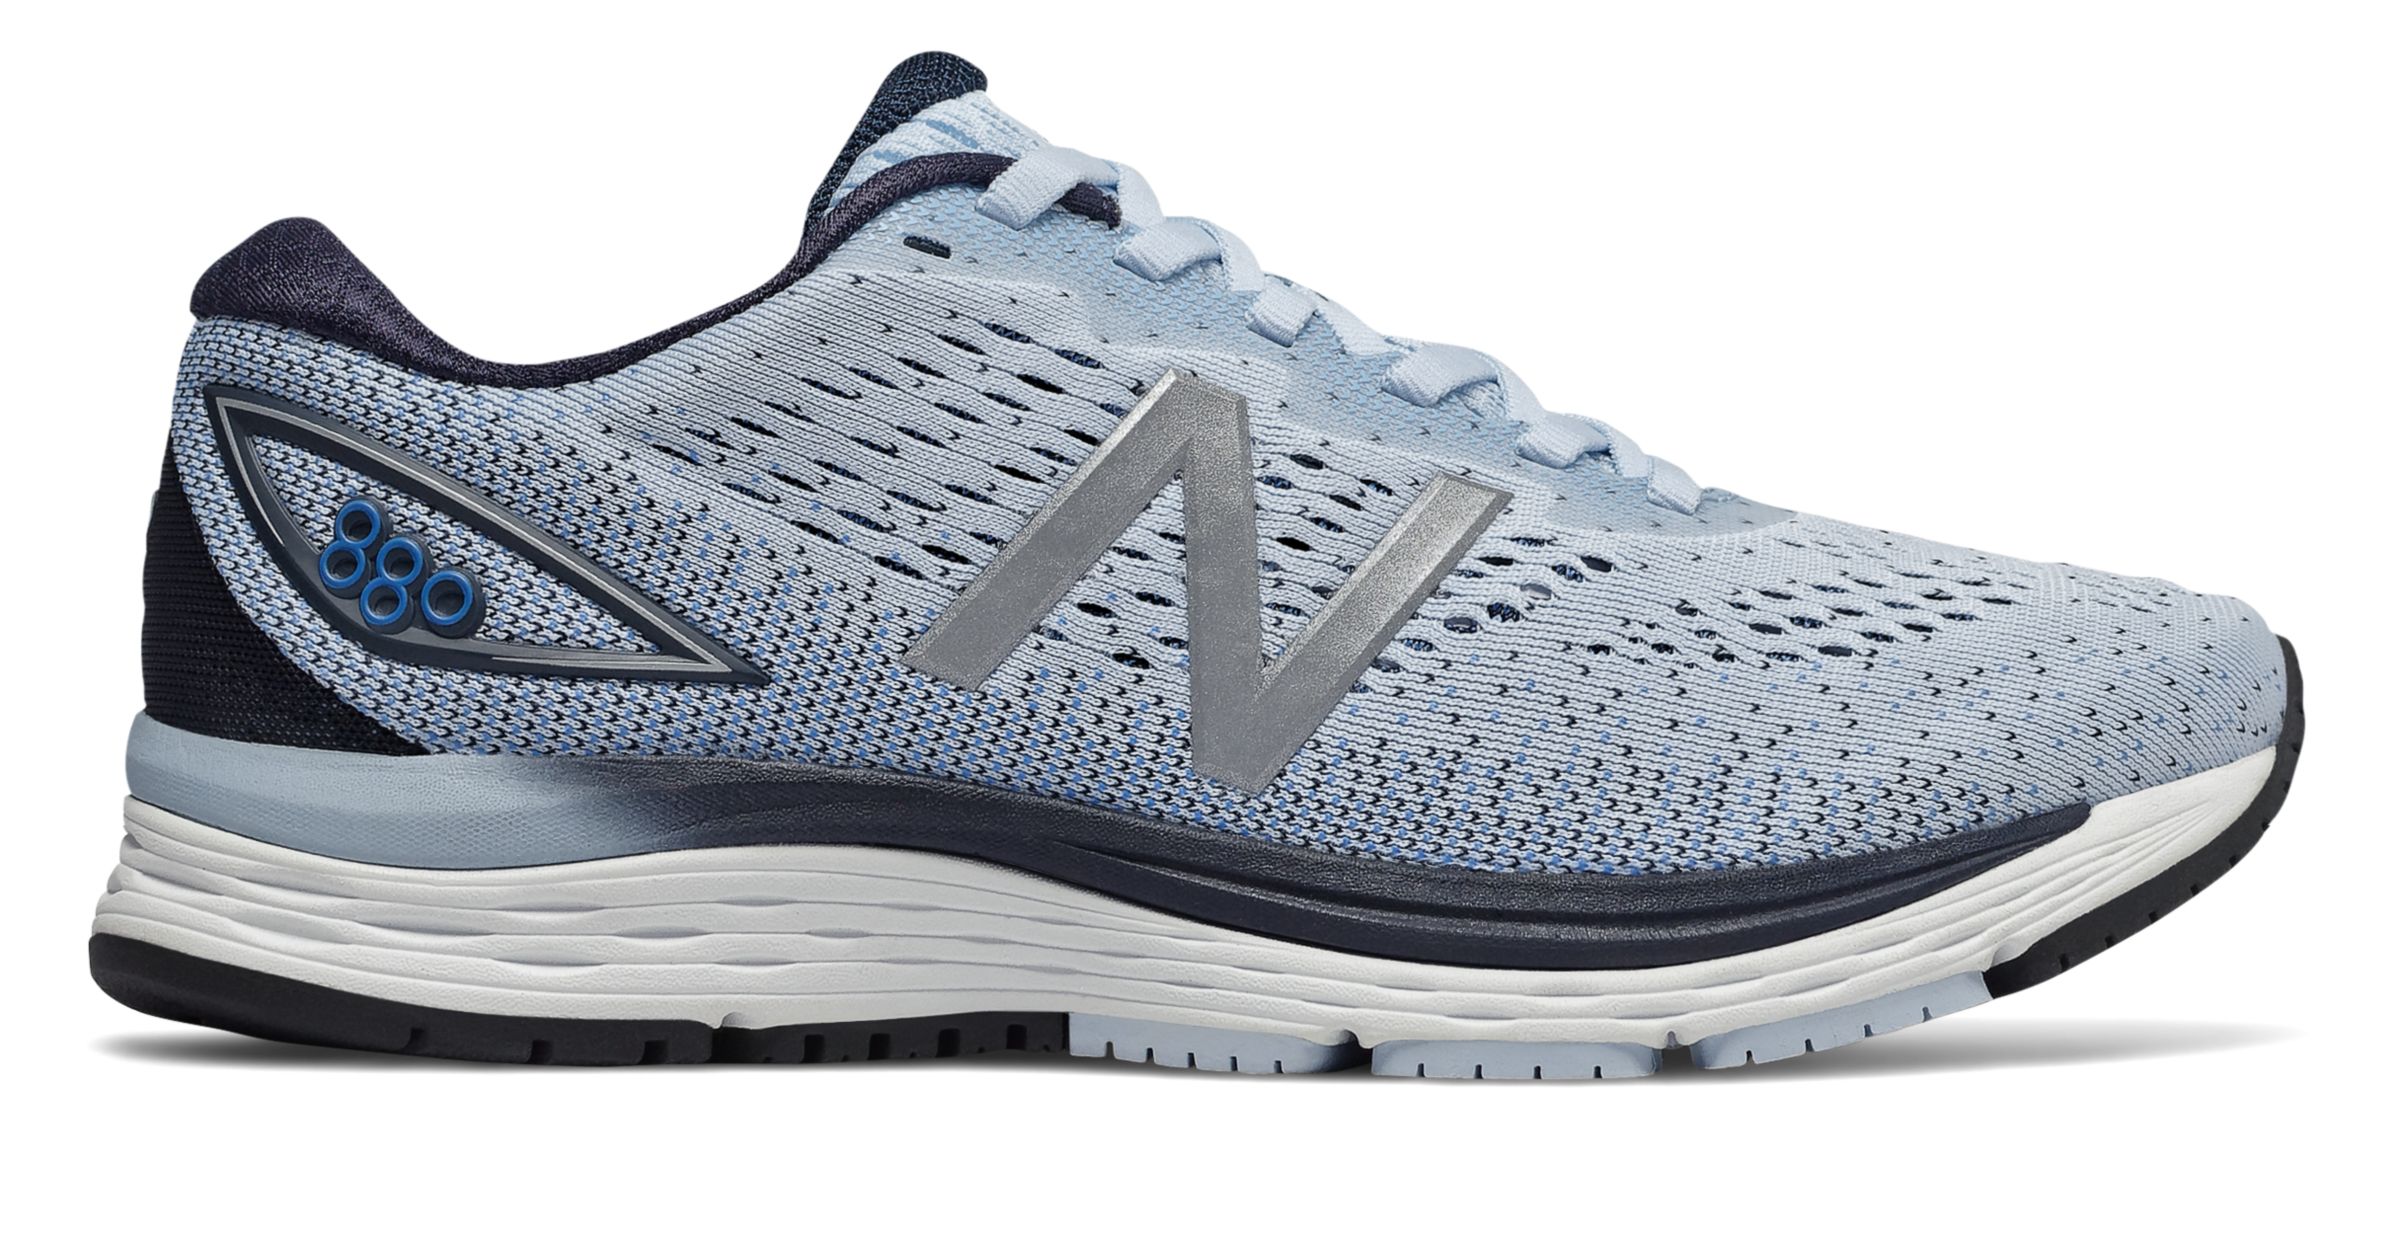 New Balance W880-V9 on Sale - Discounts Up to 64% Off on W880AB9 at Joe's New  Balance Outlet